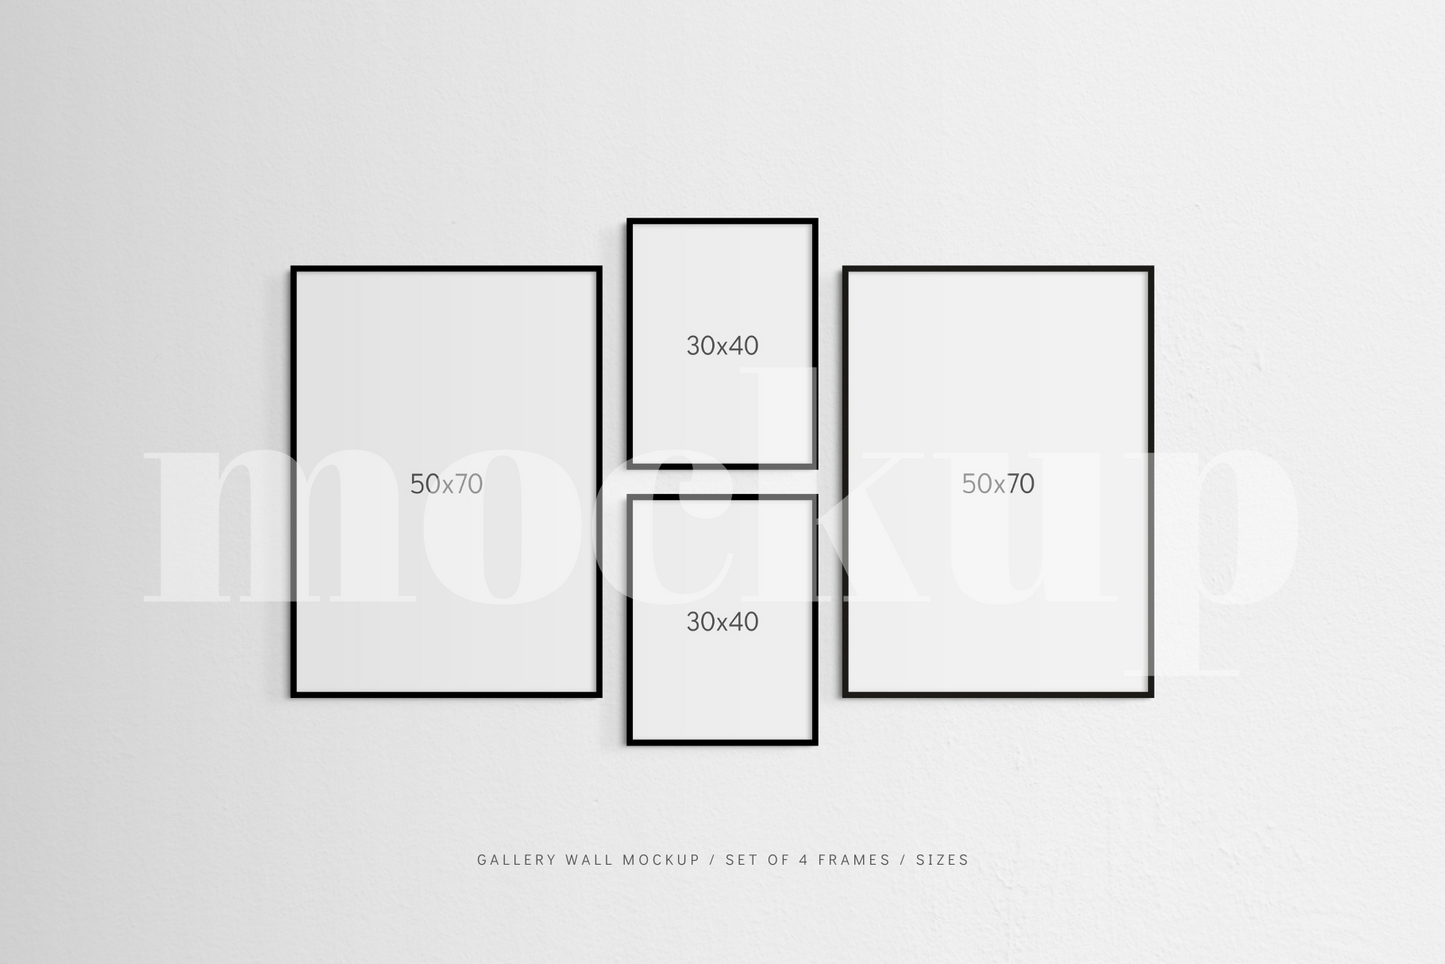 A modern, minimalist gallery wall frame mockup that features a set of 4 vertical black frames.